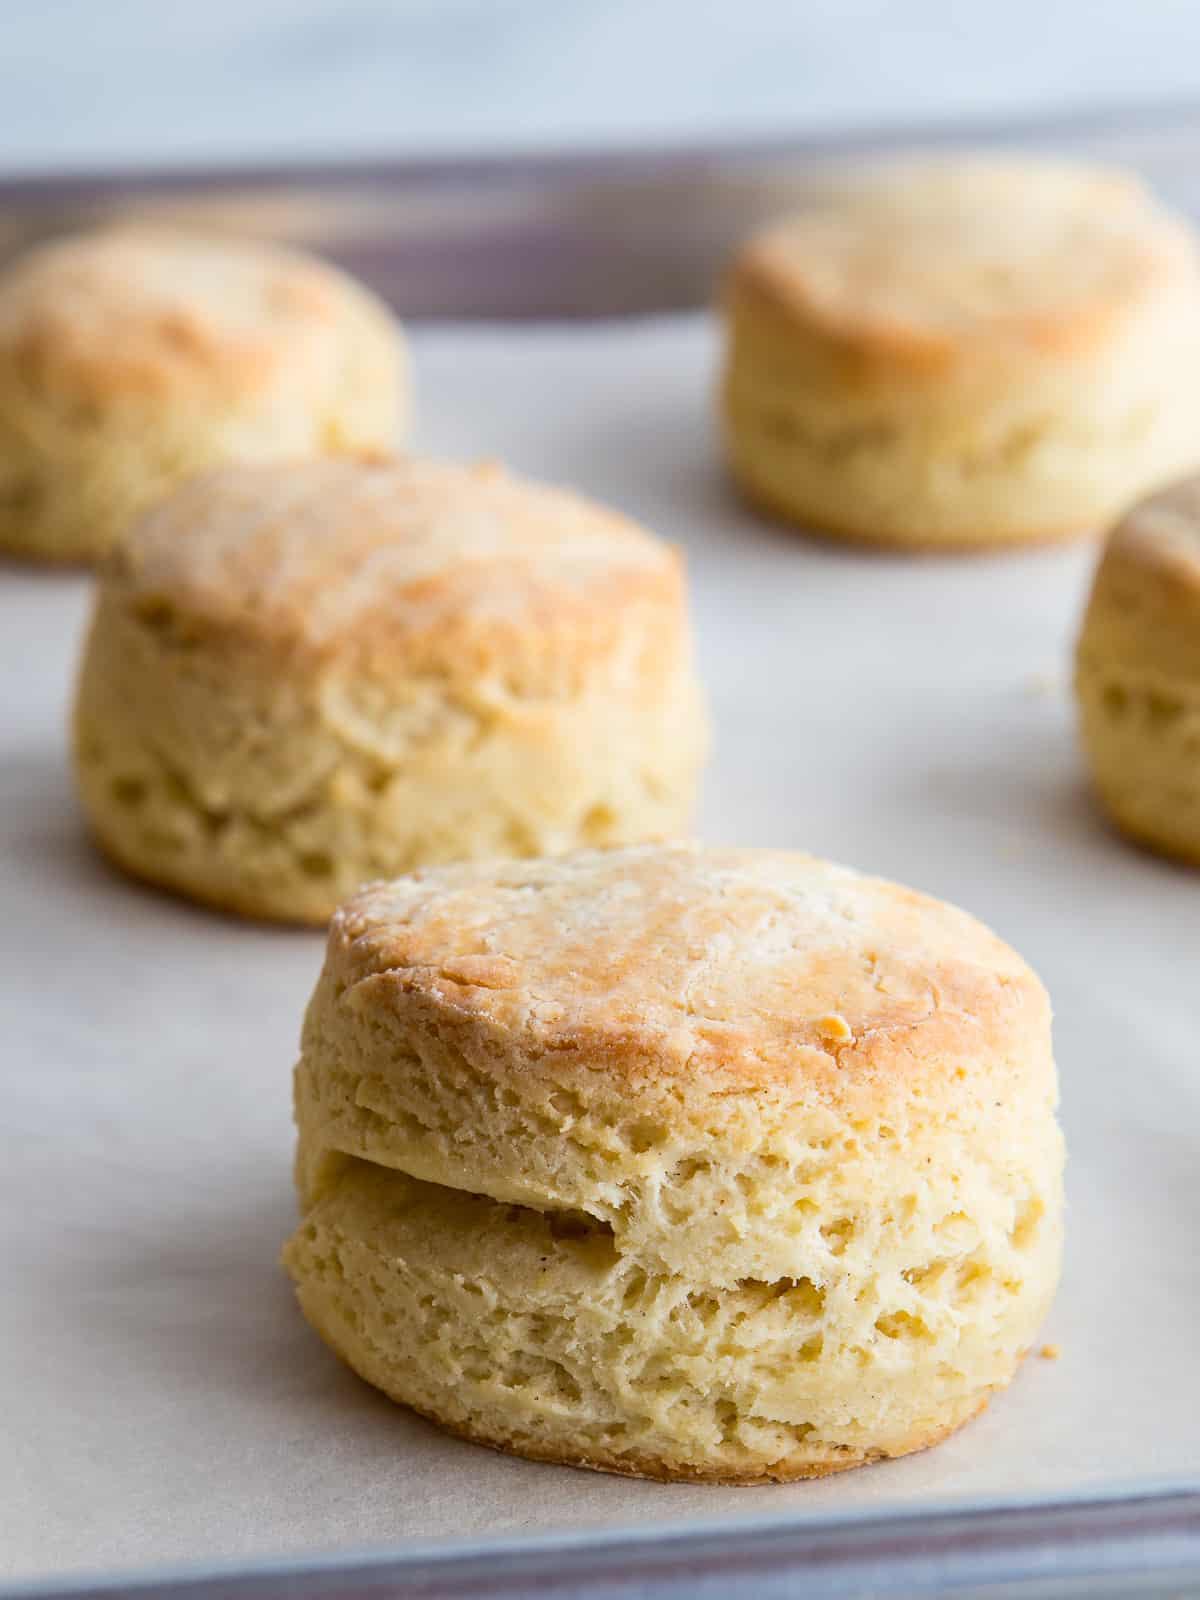 Baked gluten-free biscuits on a baking sheet.